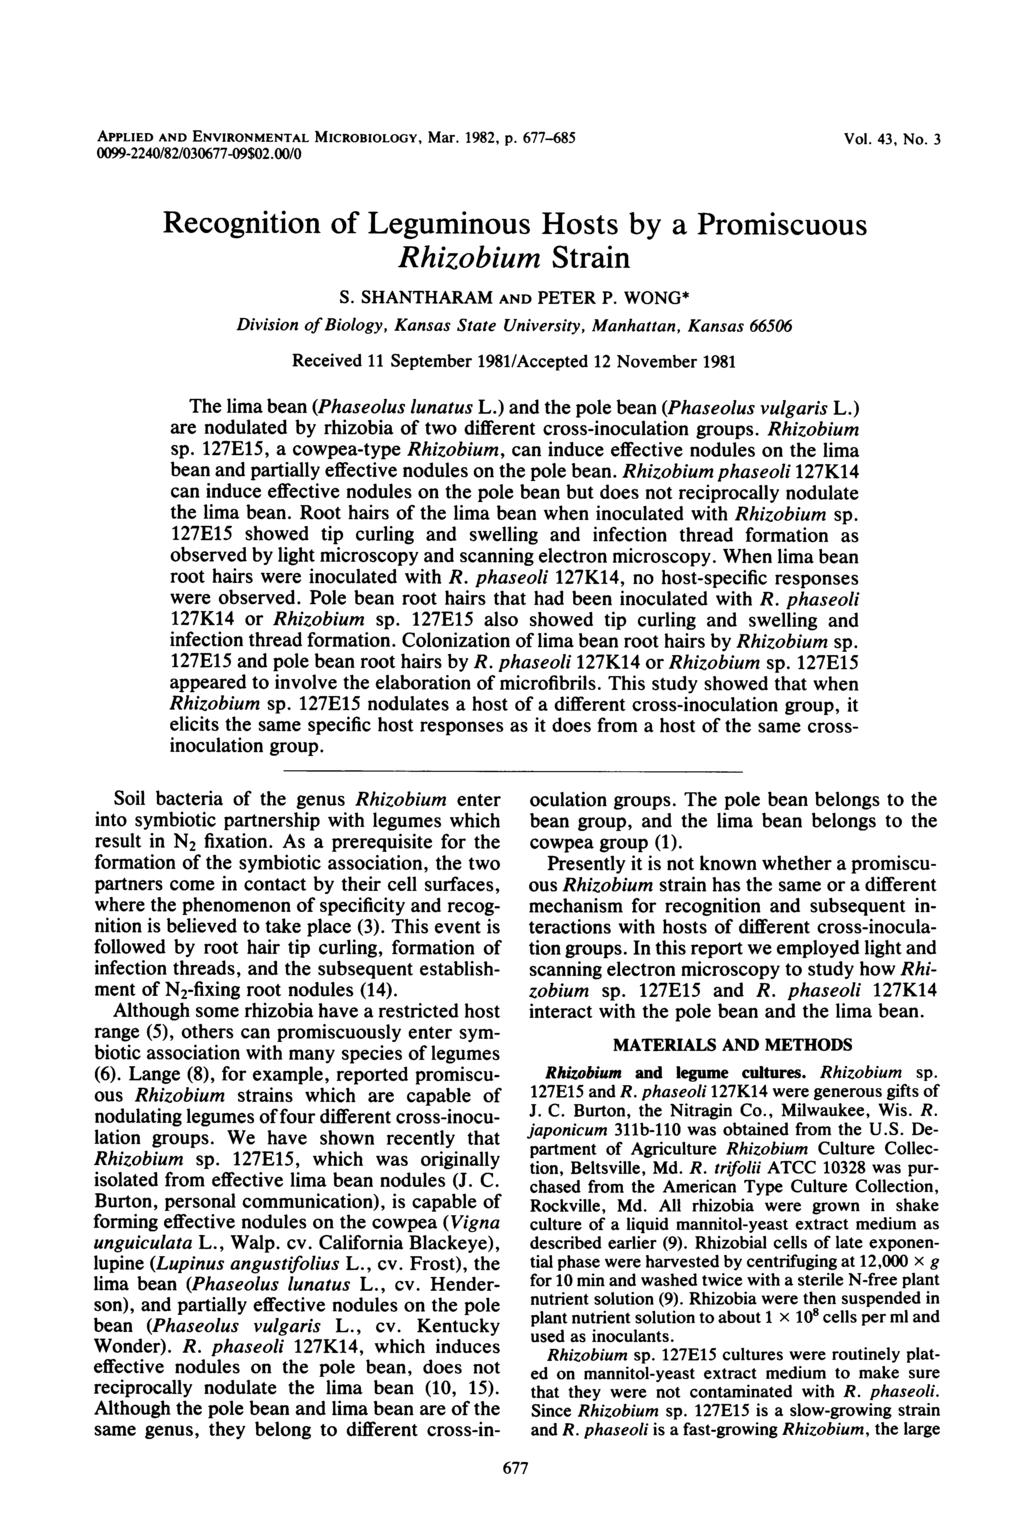 APPLIED AND ENVIRONMENTAL MICROBIOLOGY, Mar. 1982, p. 677-685 0099-2240/82/030677-09$02.00/0 Vol. 43, No. 3 Recognition of Leguminous Hosts by a Promiscuous Rhizobium Strain S. SHANTHARAM AND PETER P.